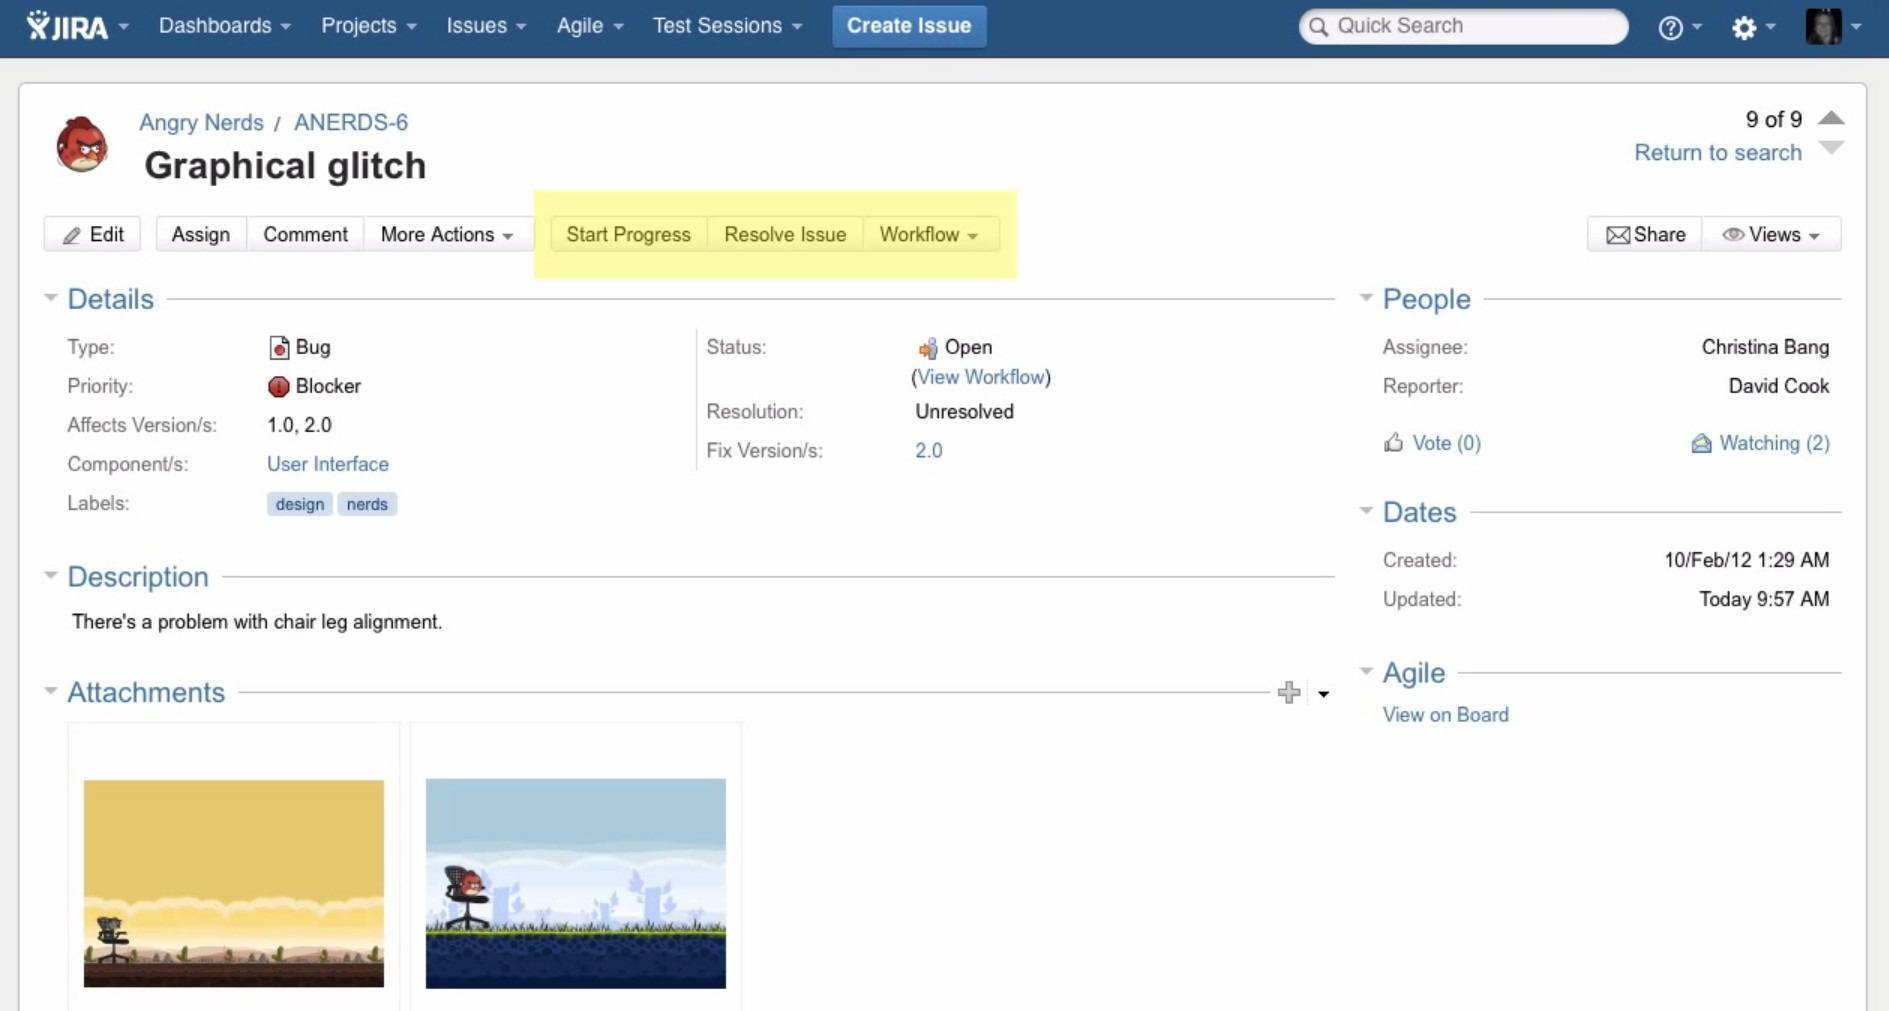 jira client download